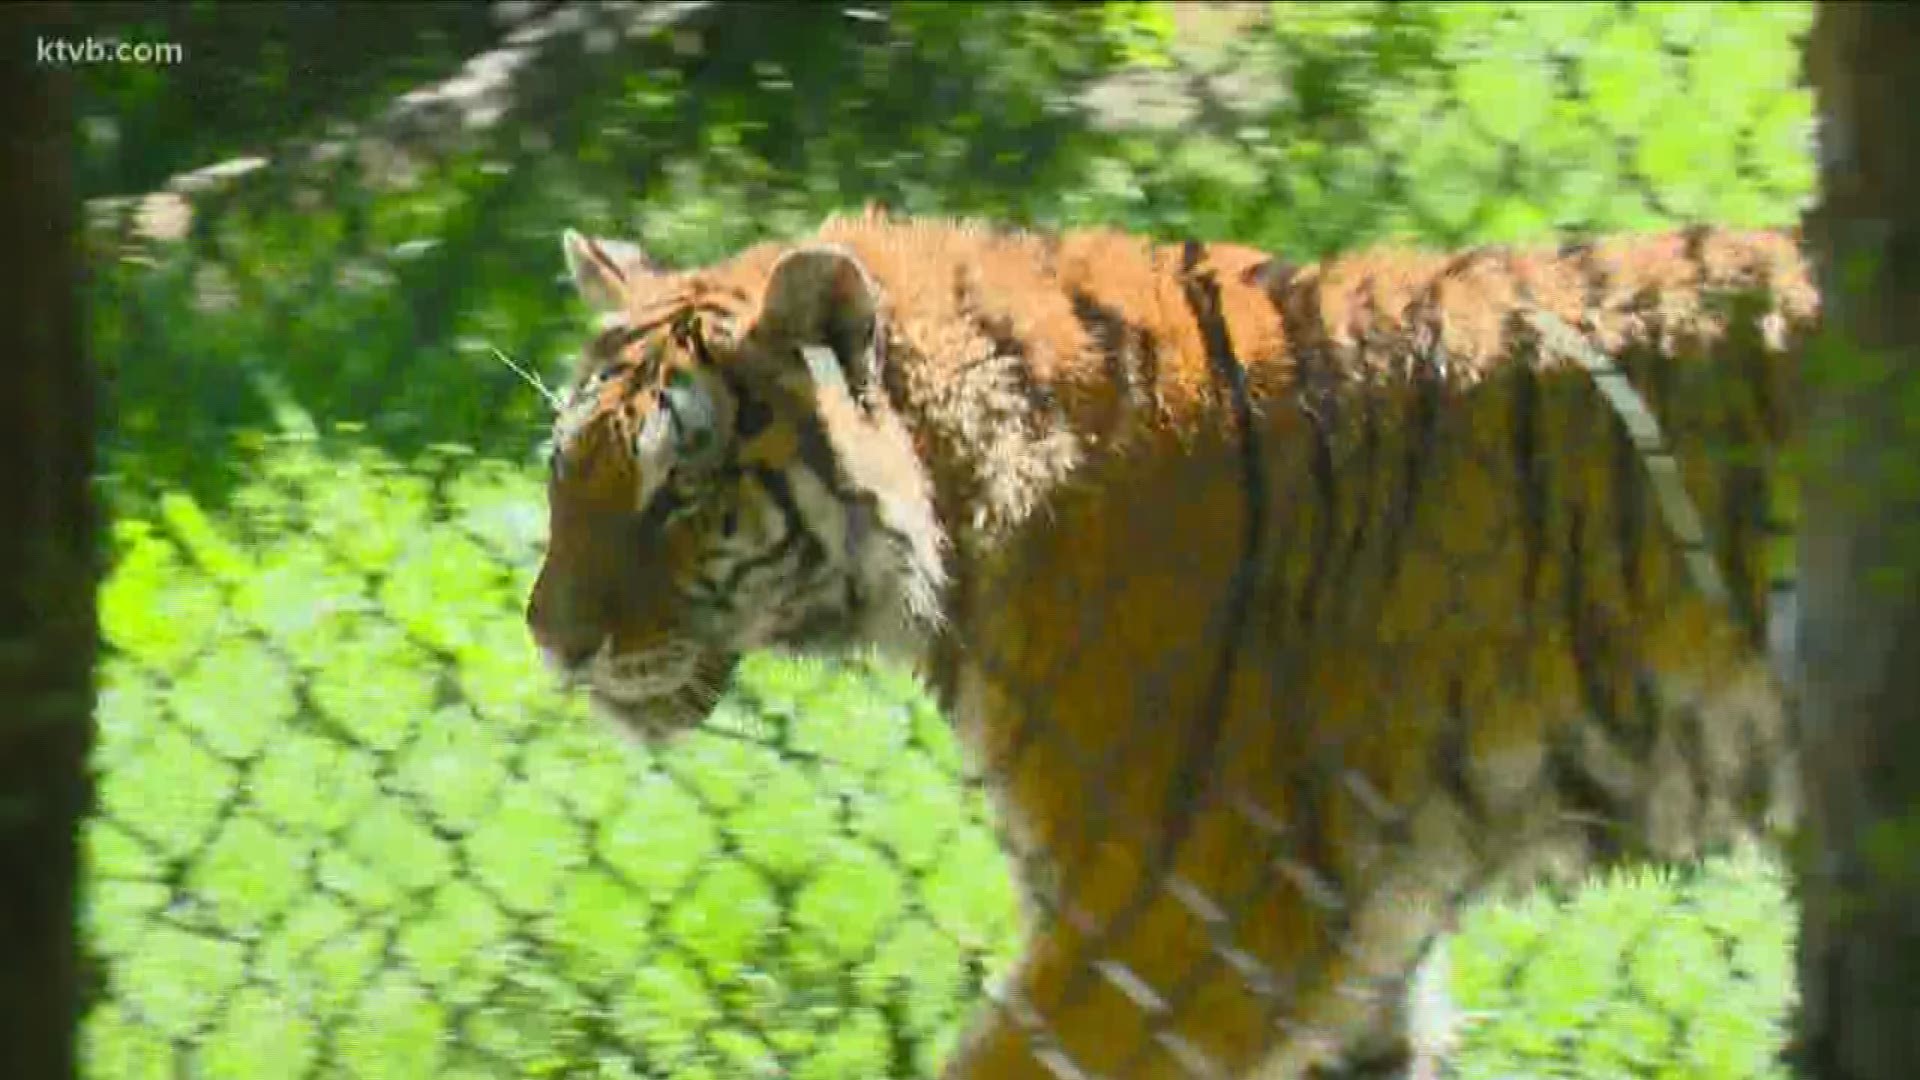 Zoo officials say they have come up with a plan to keep staff and visitors safe.